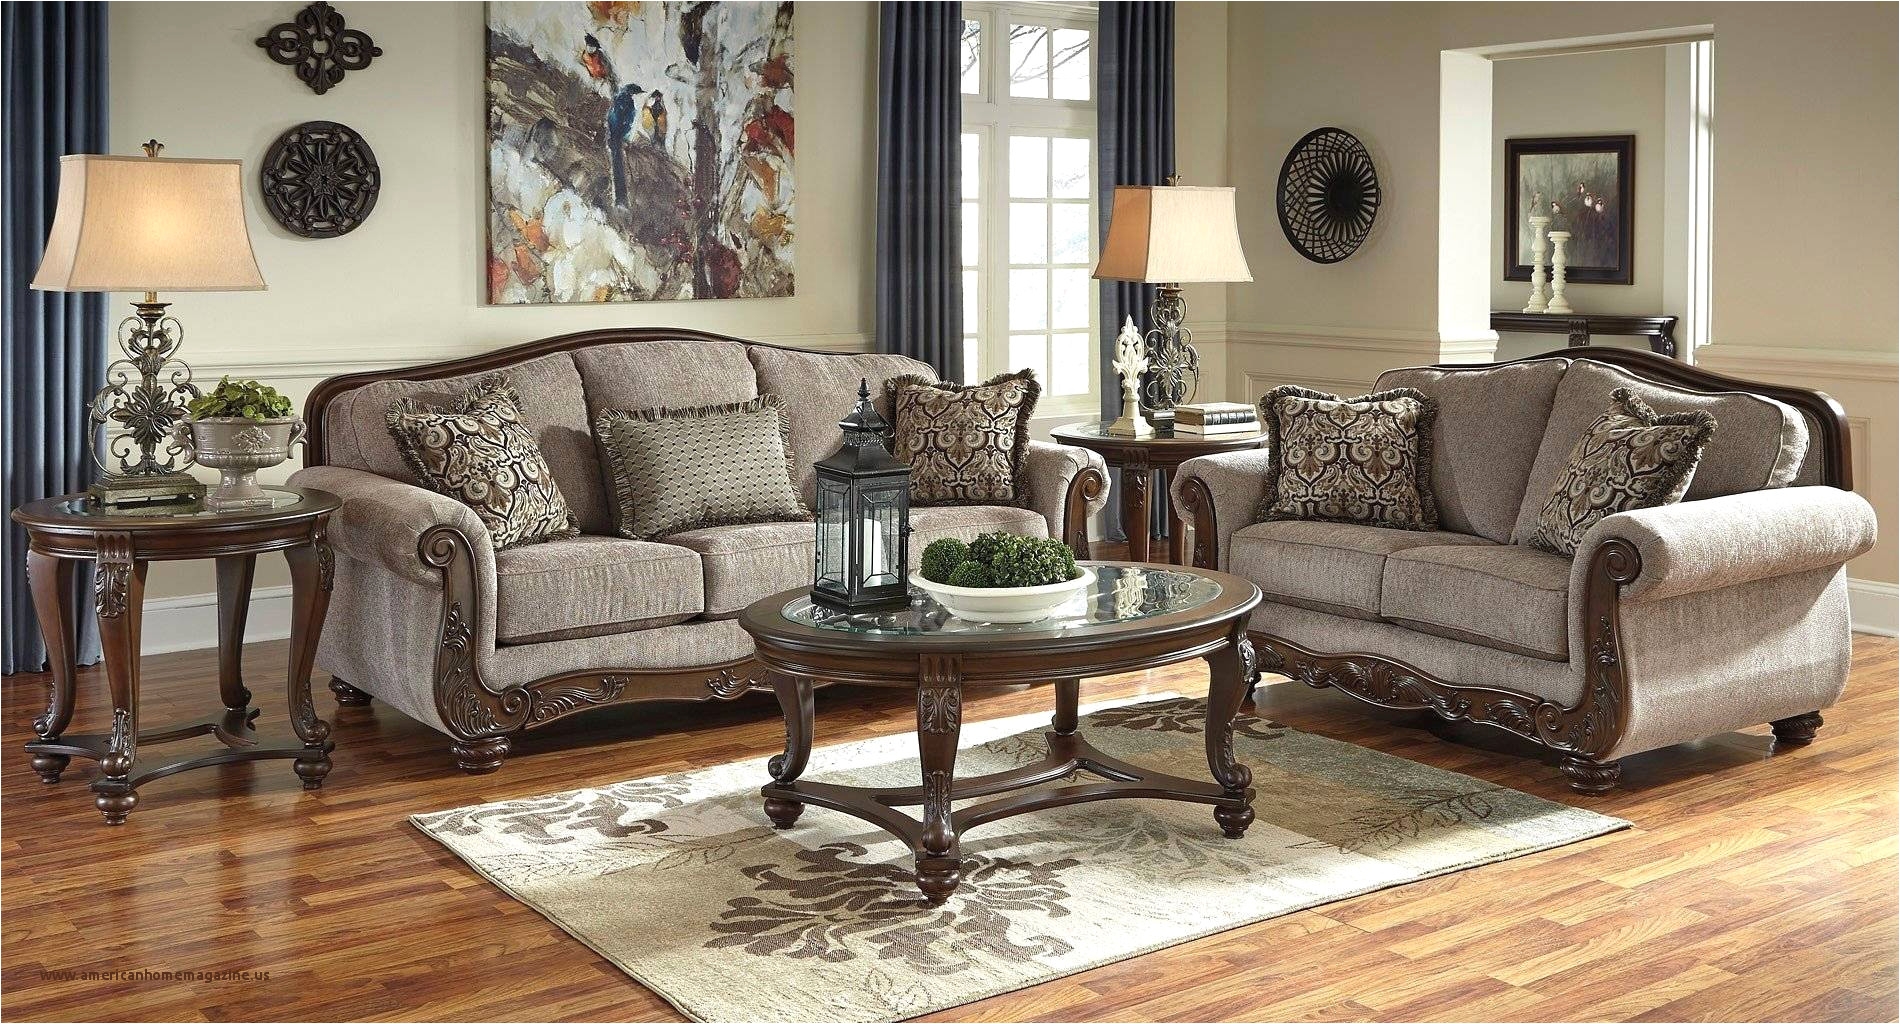 living room sets pictures great 34 new sitting room lighting stock living room decor ideas of